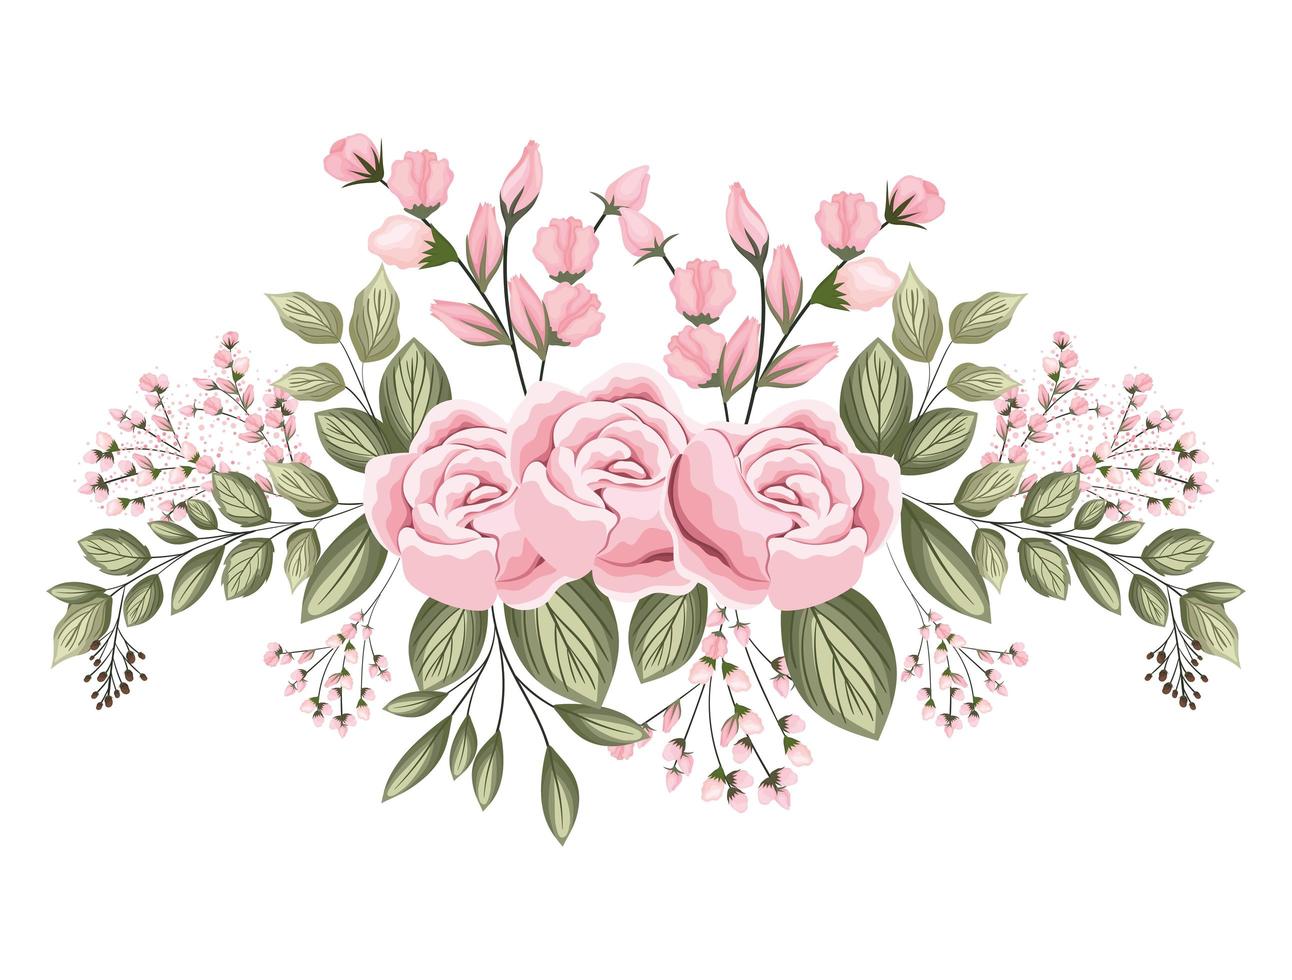 Pink roses flowers with buds and leaves painting vector